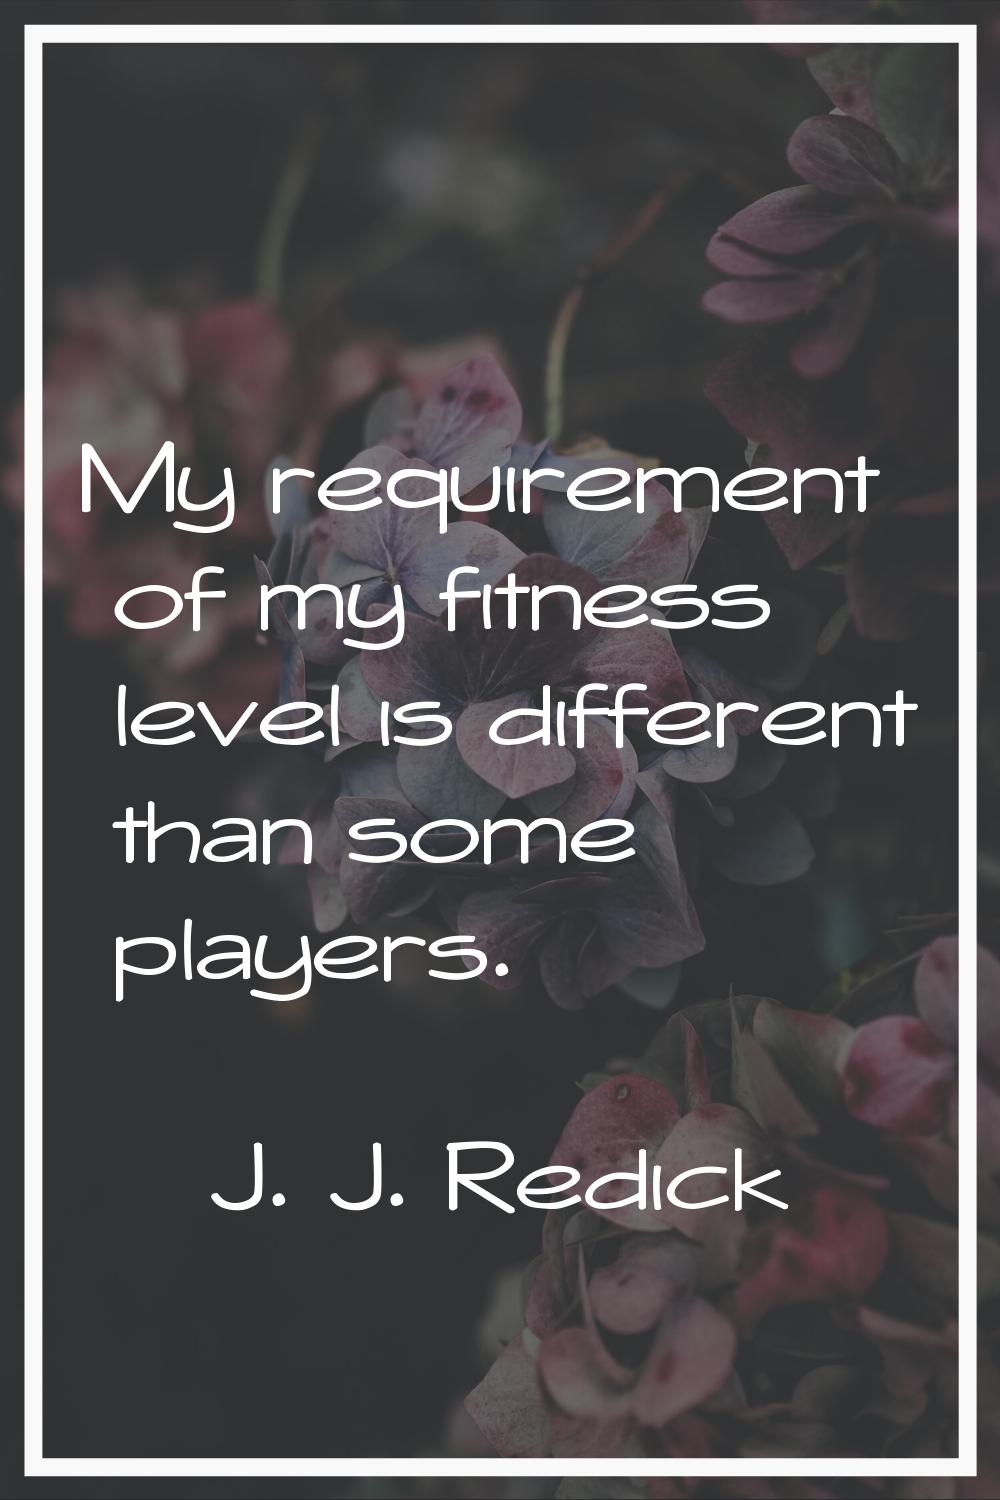 My requirement of my fitness level is different than some players.